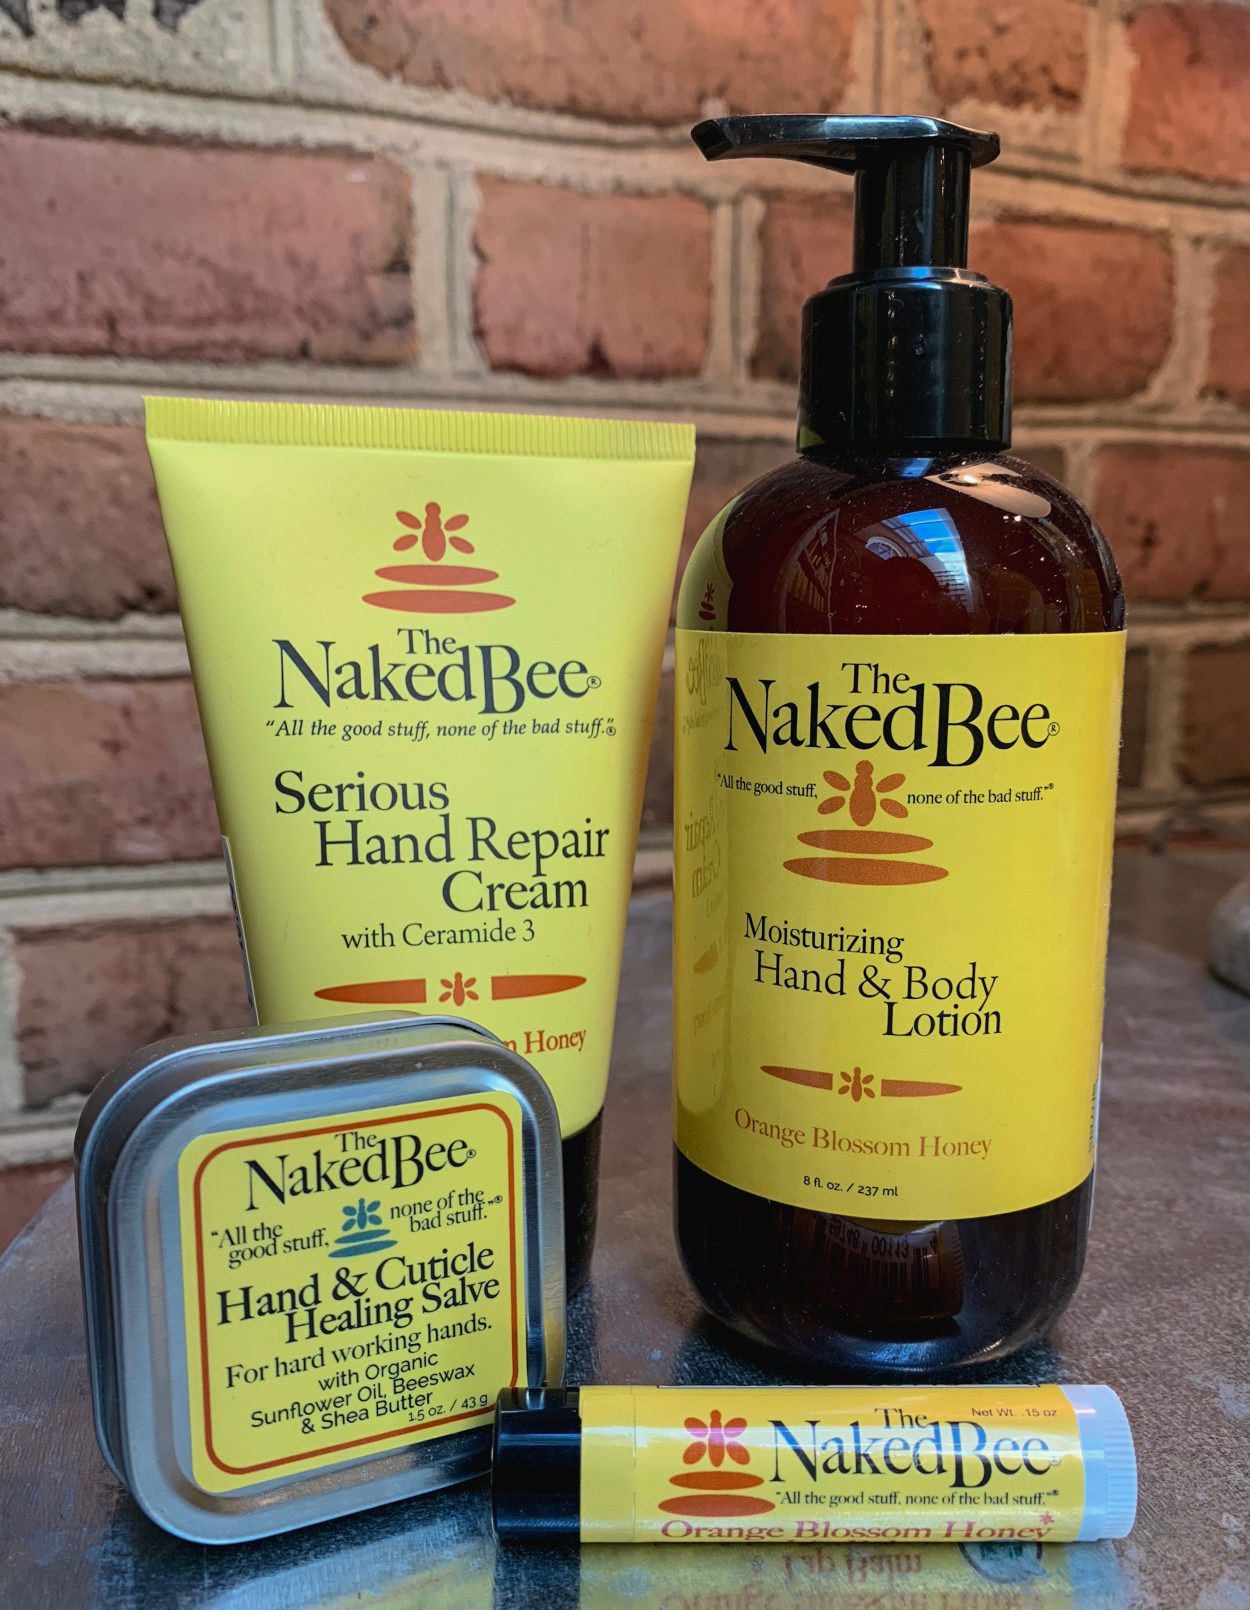 The Naked Bee Serious Hand Repair Cream with Ceramide 3 from the Garden Shop.